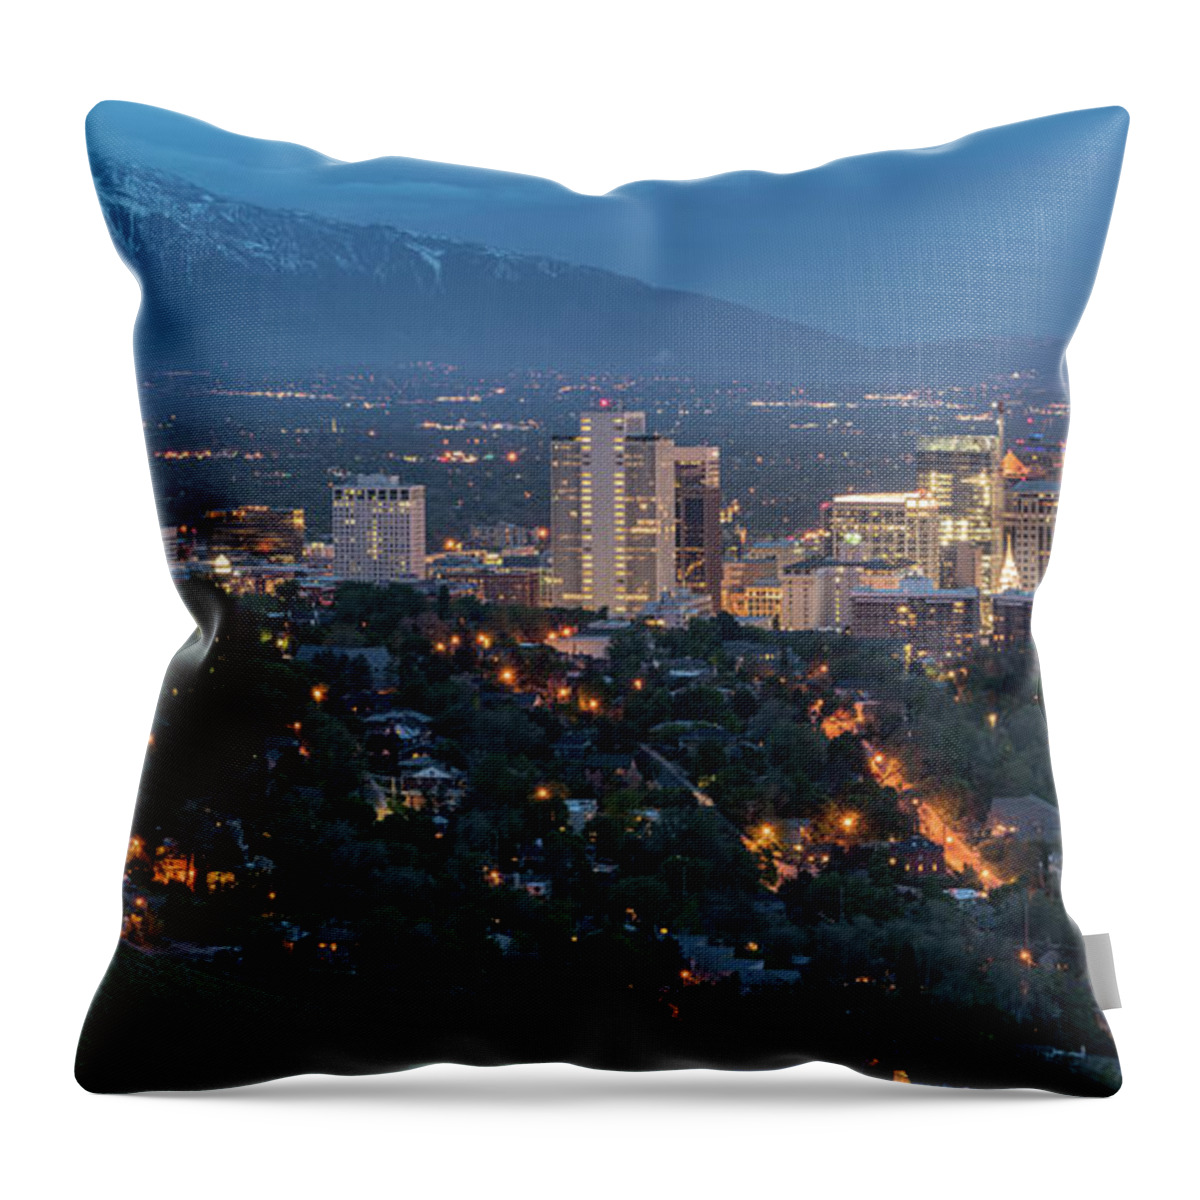 Salt Lake City Throw Pillow featuring the photograph Spring Night in Salt Lake City by James Udall